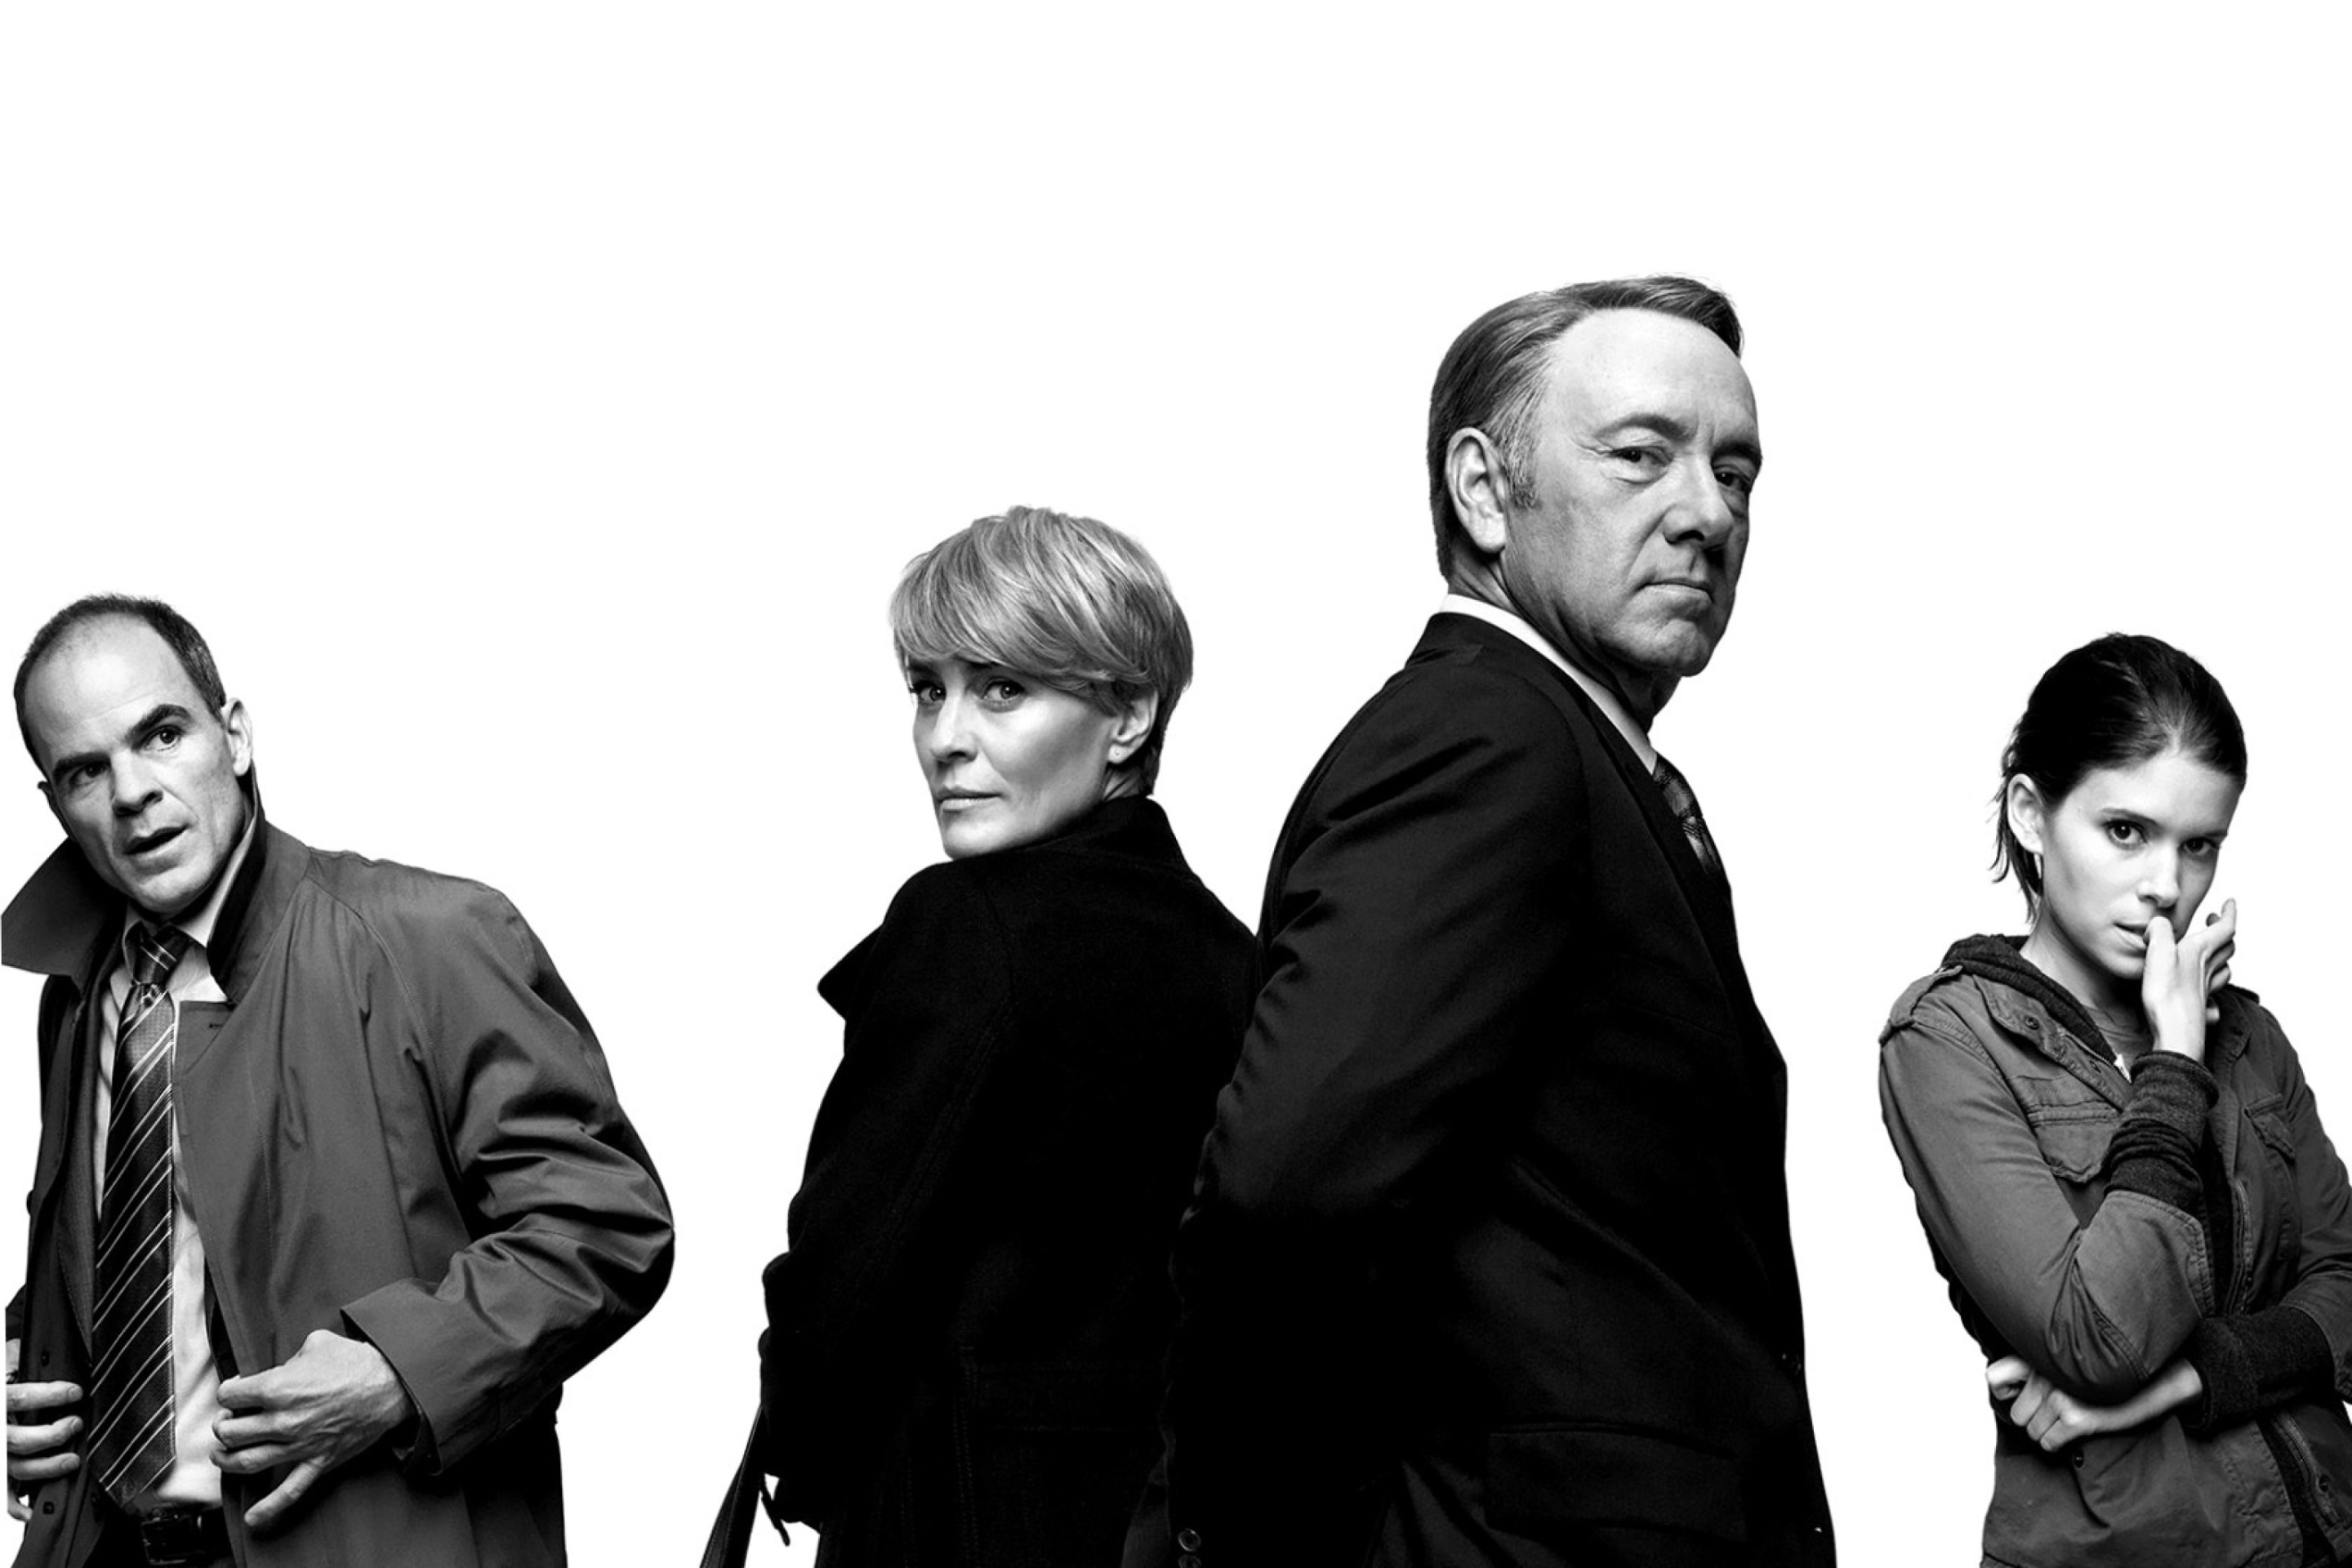 House of Cards with Kevin Spacey wallpaper 2880x1920